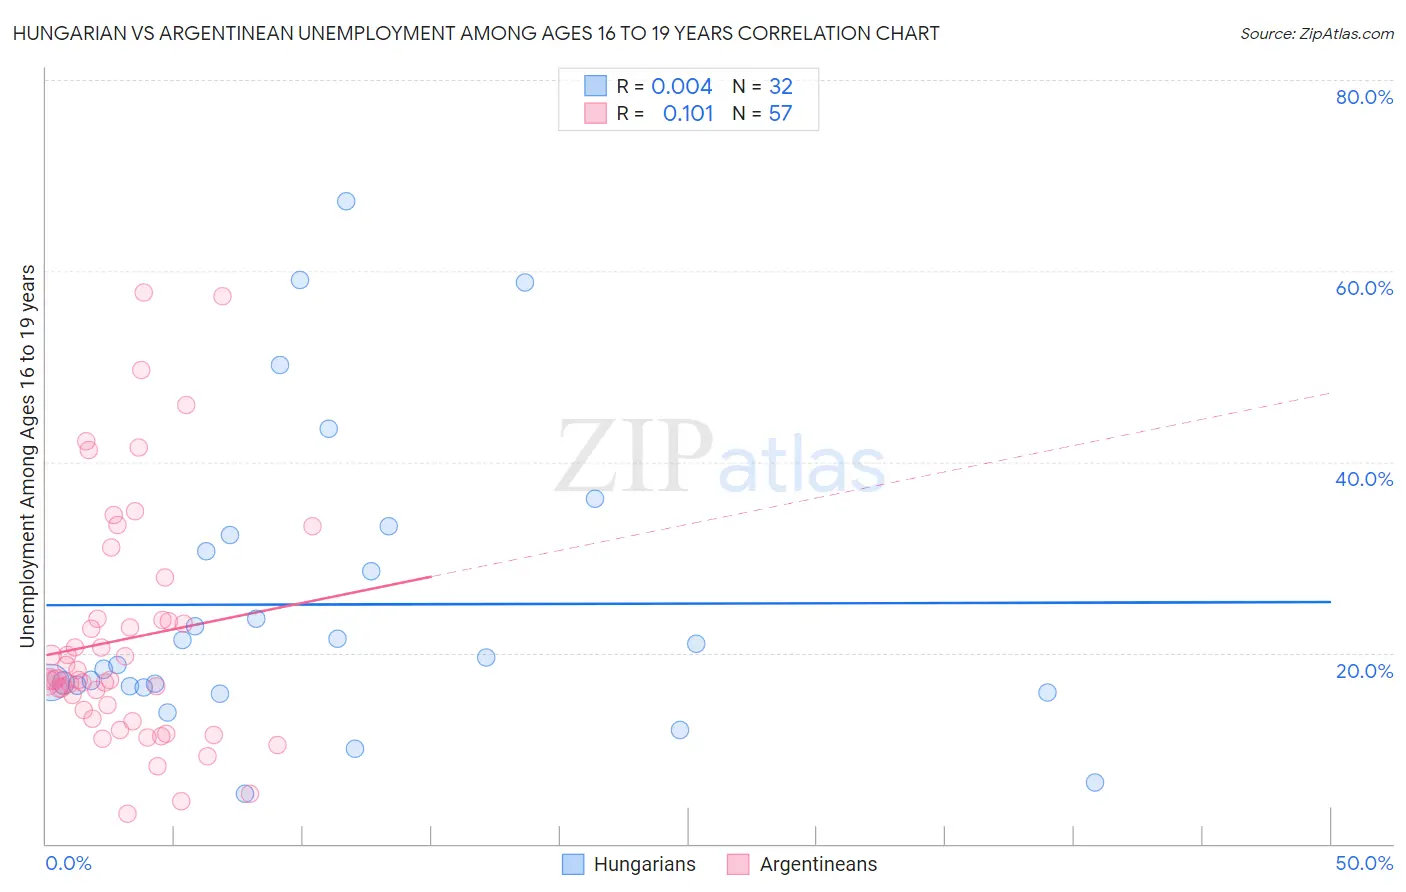 Hungarian vs Argentinean Unemployment Among Ages 16 to 19 years